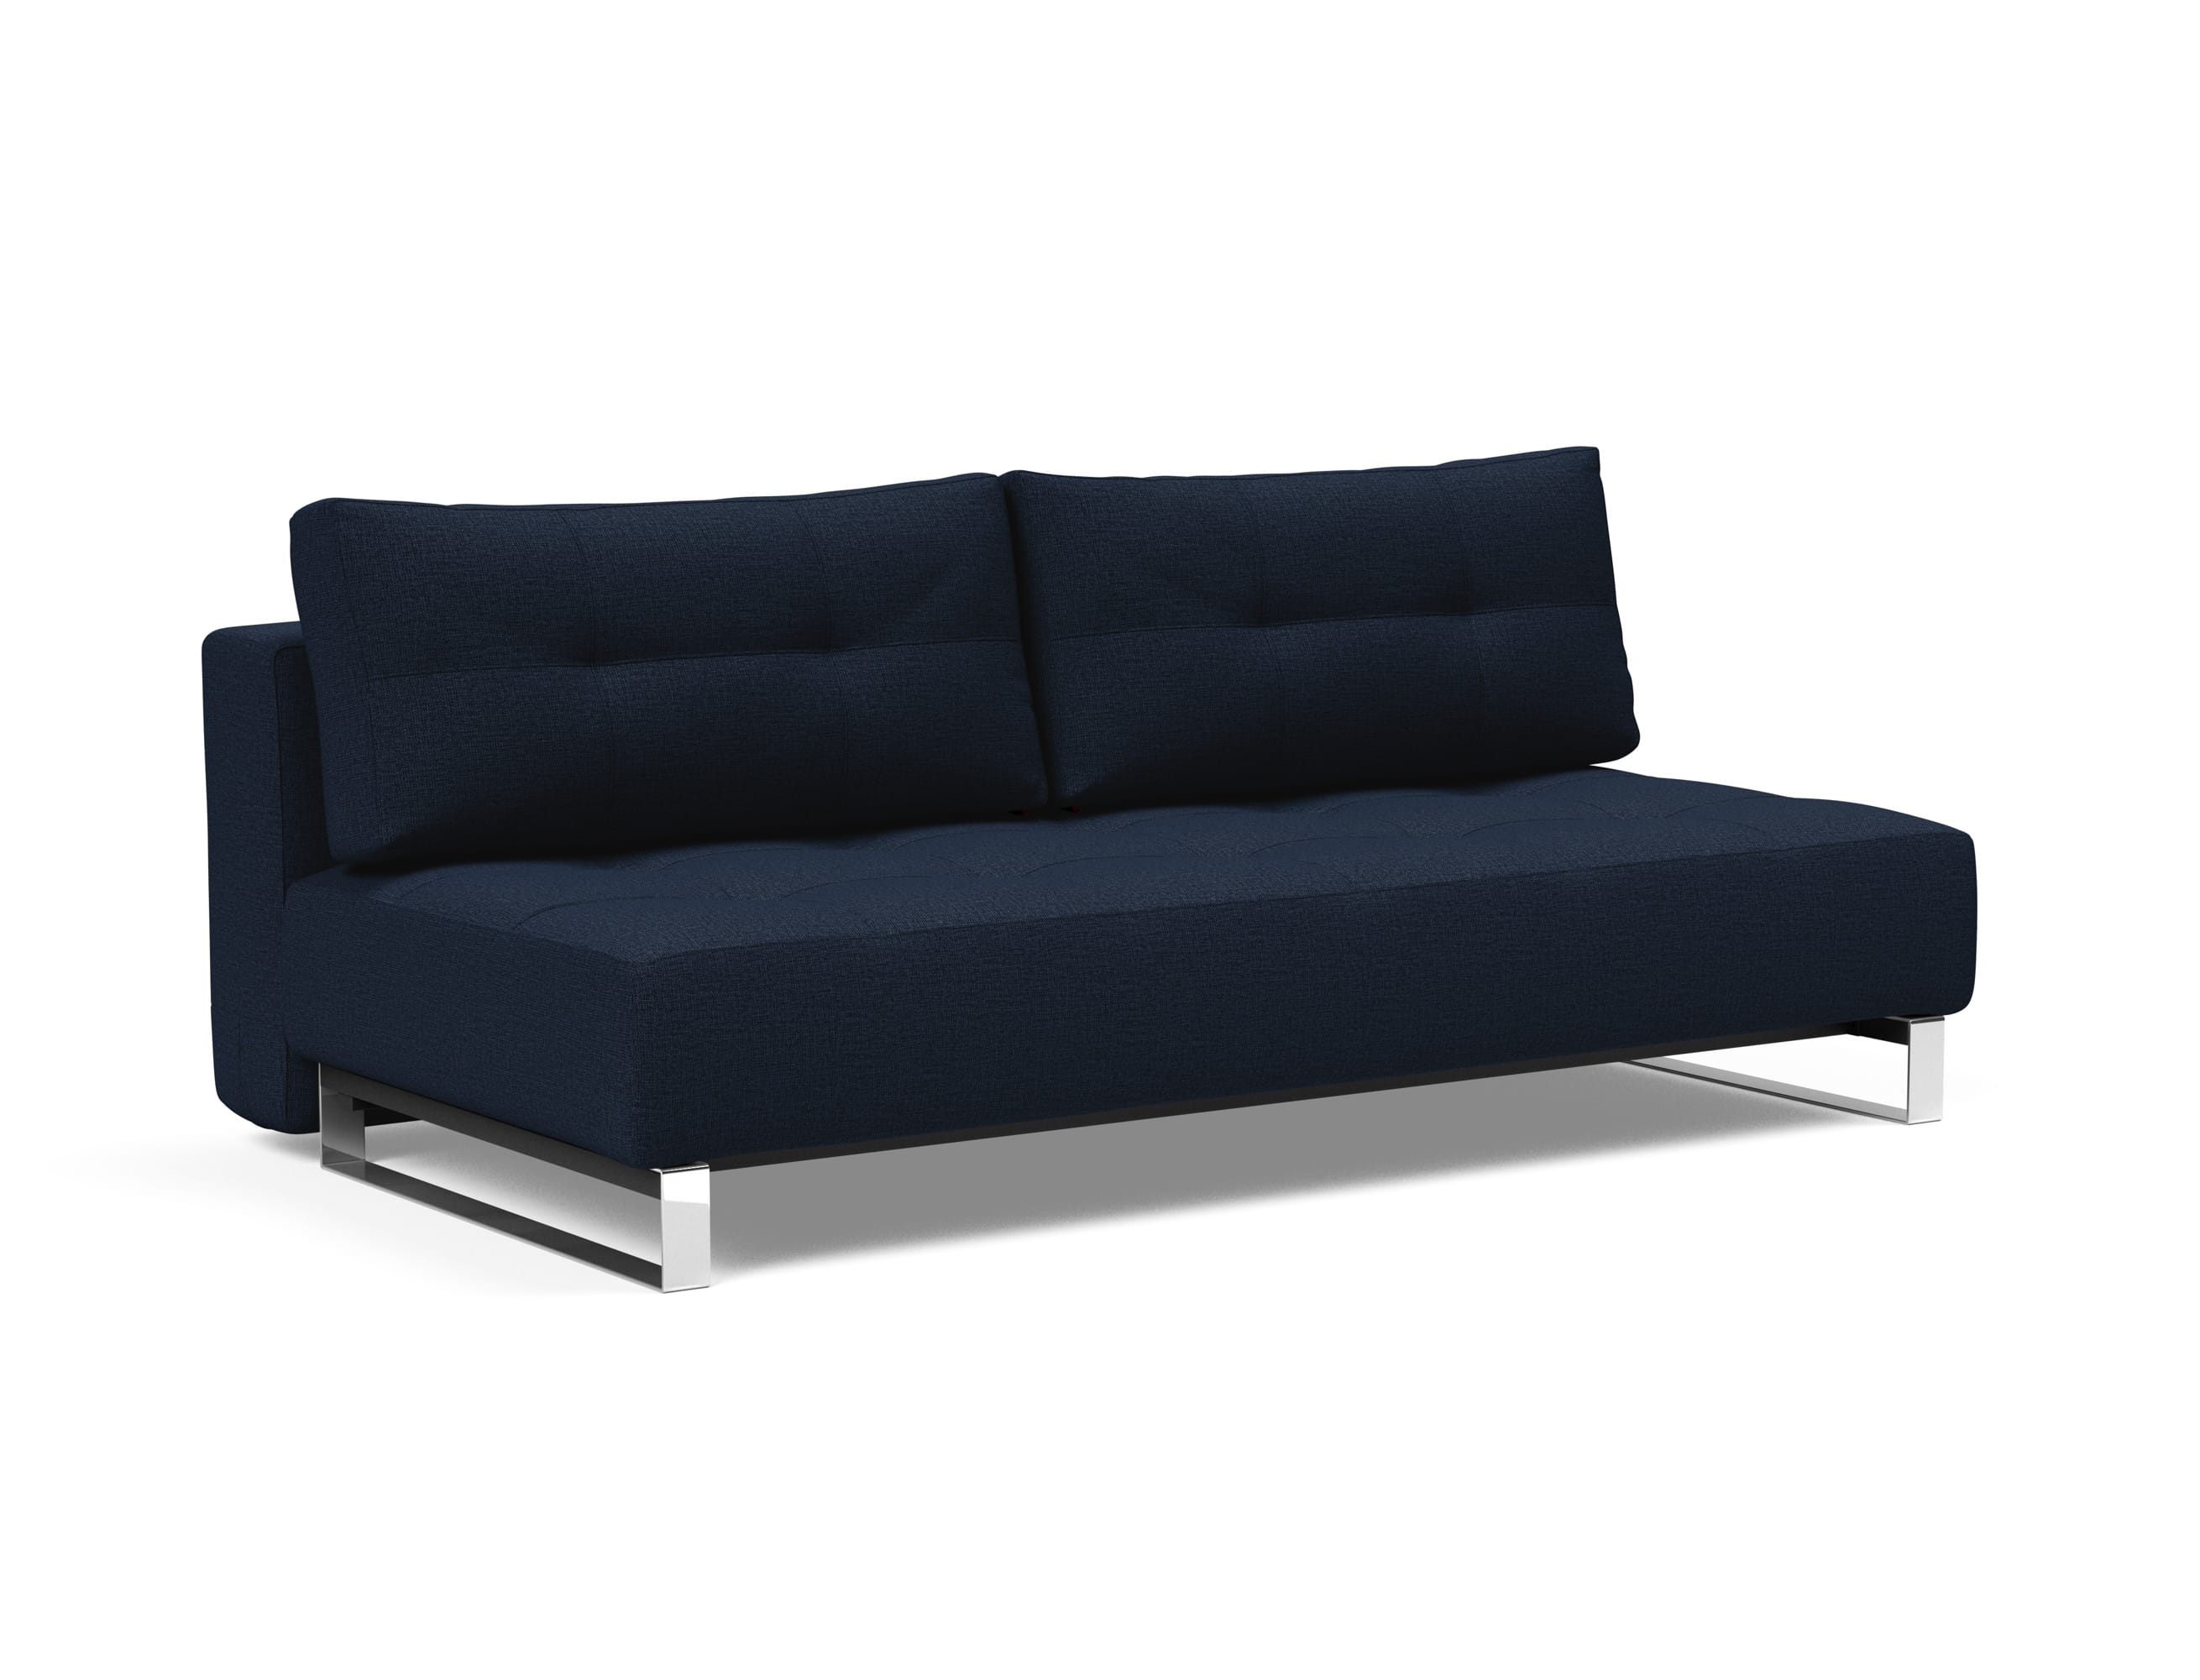 Supremax Deluxe Excess Sofa Bed (Queen Size) Mixed Dance Blue by Innovation